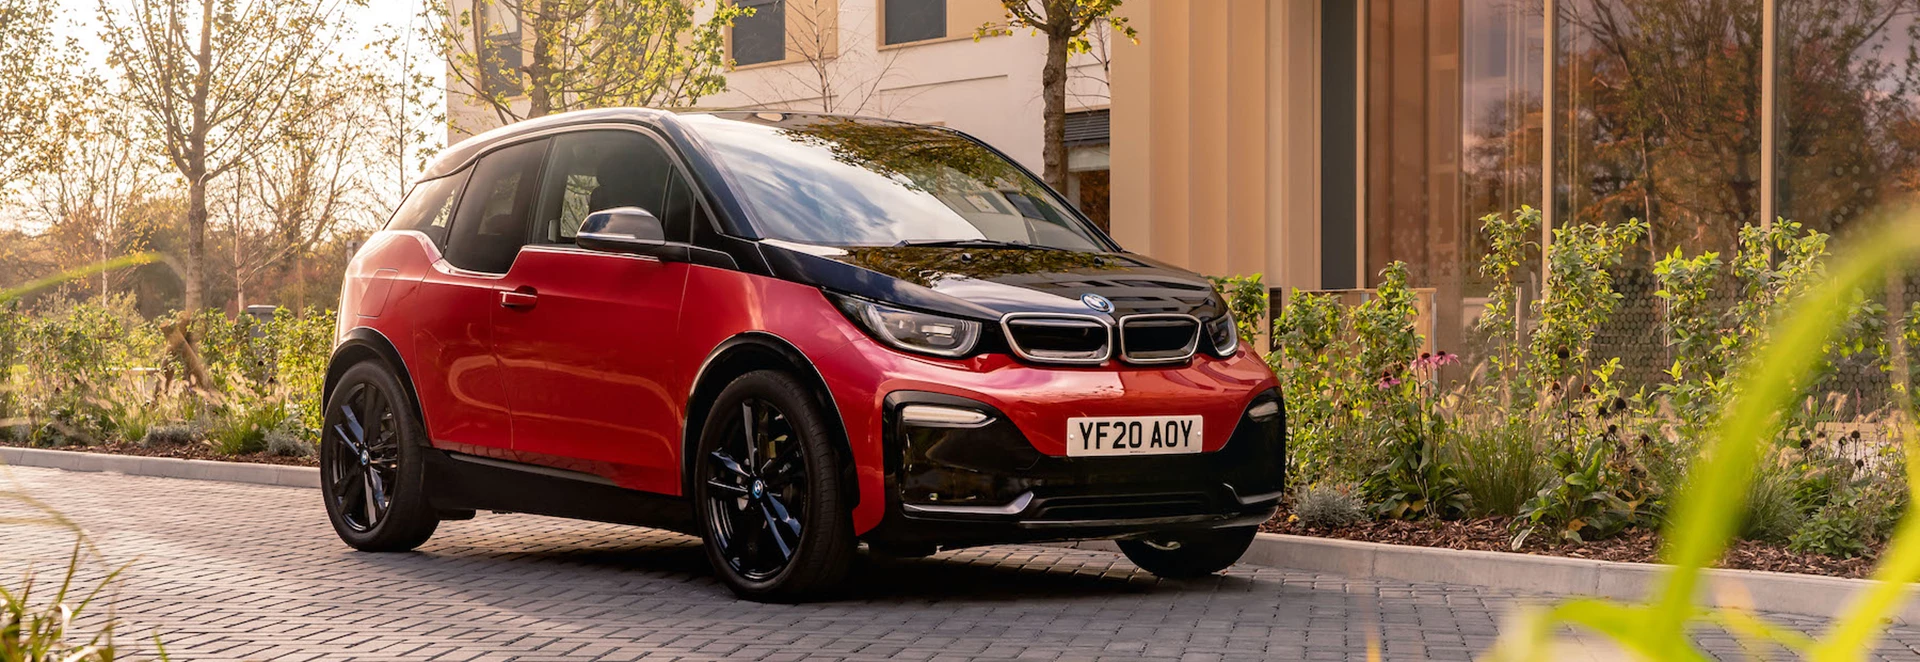 5 cool things to know about the BMW i3 